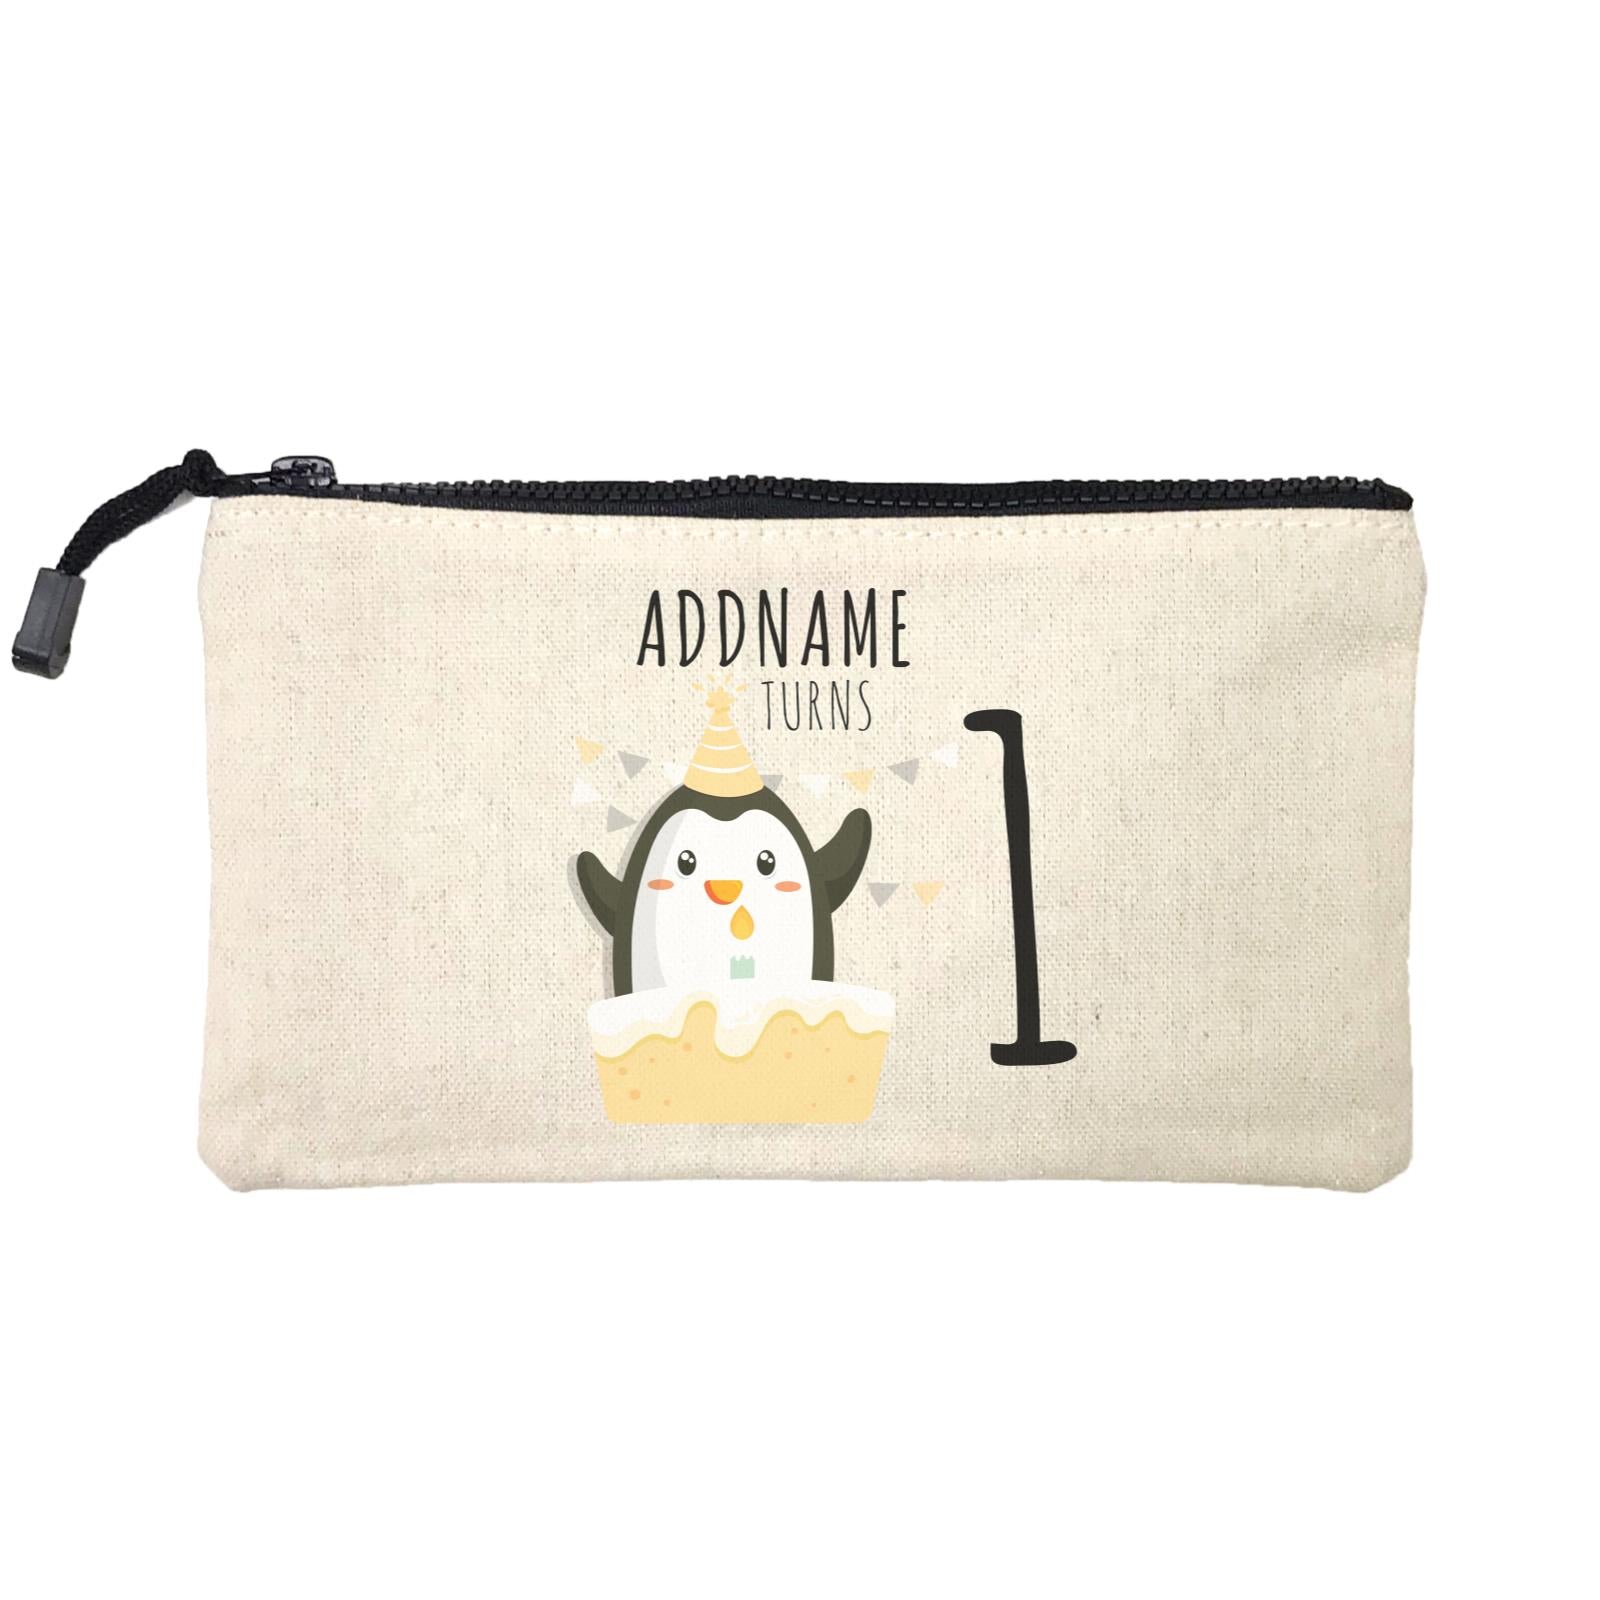 Birthday Cute Penguin And Cake Addname Turns 1 Mini Accessories Stationery Pouch